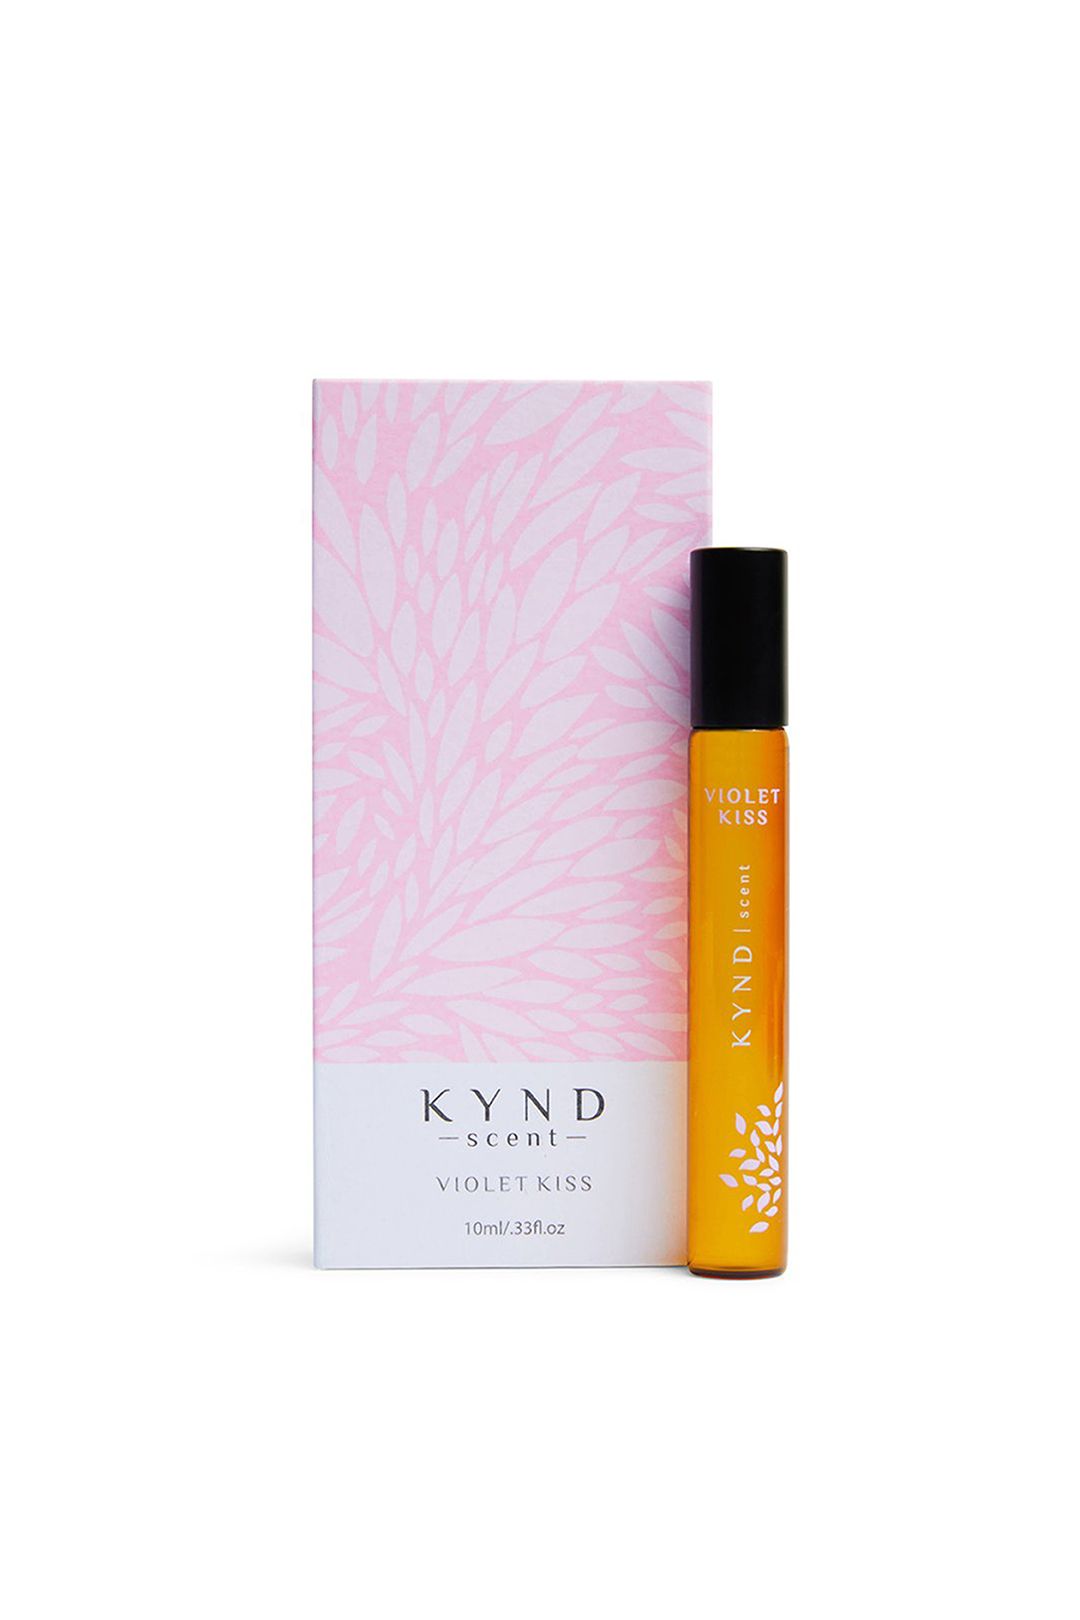 kynd-scent-violet-kiss-product-1